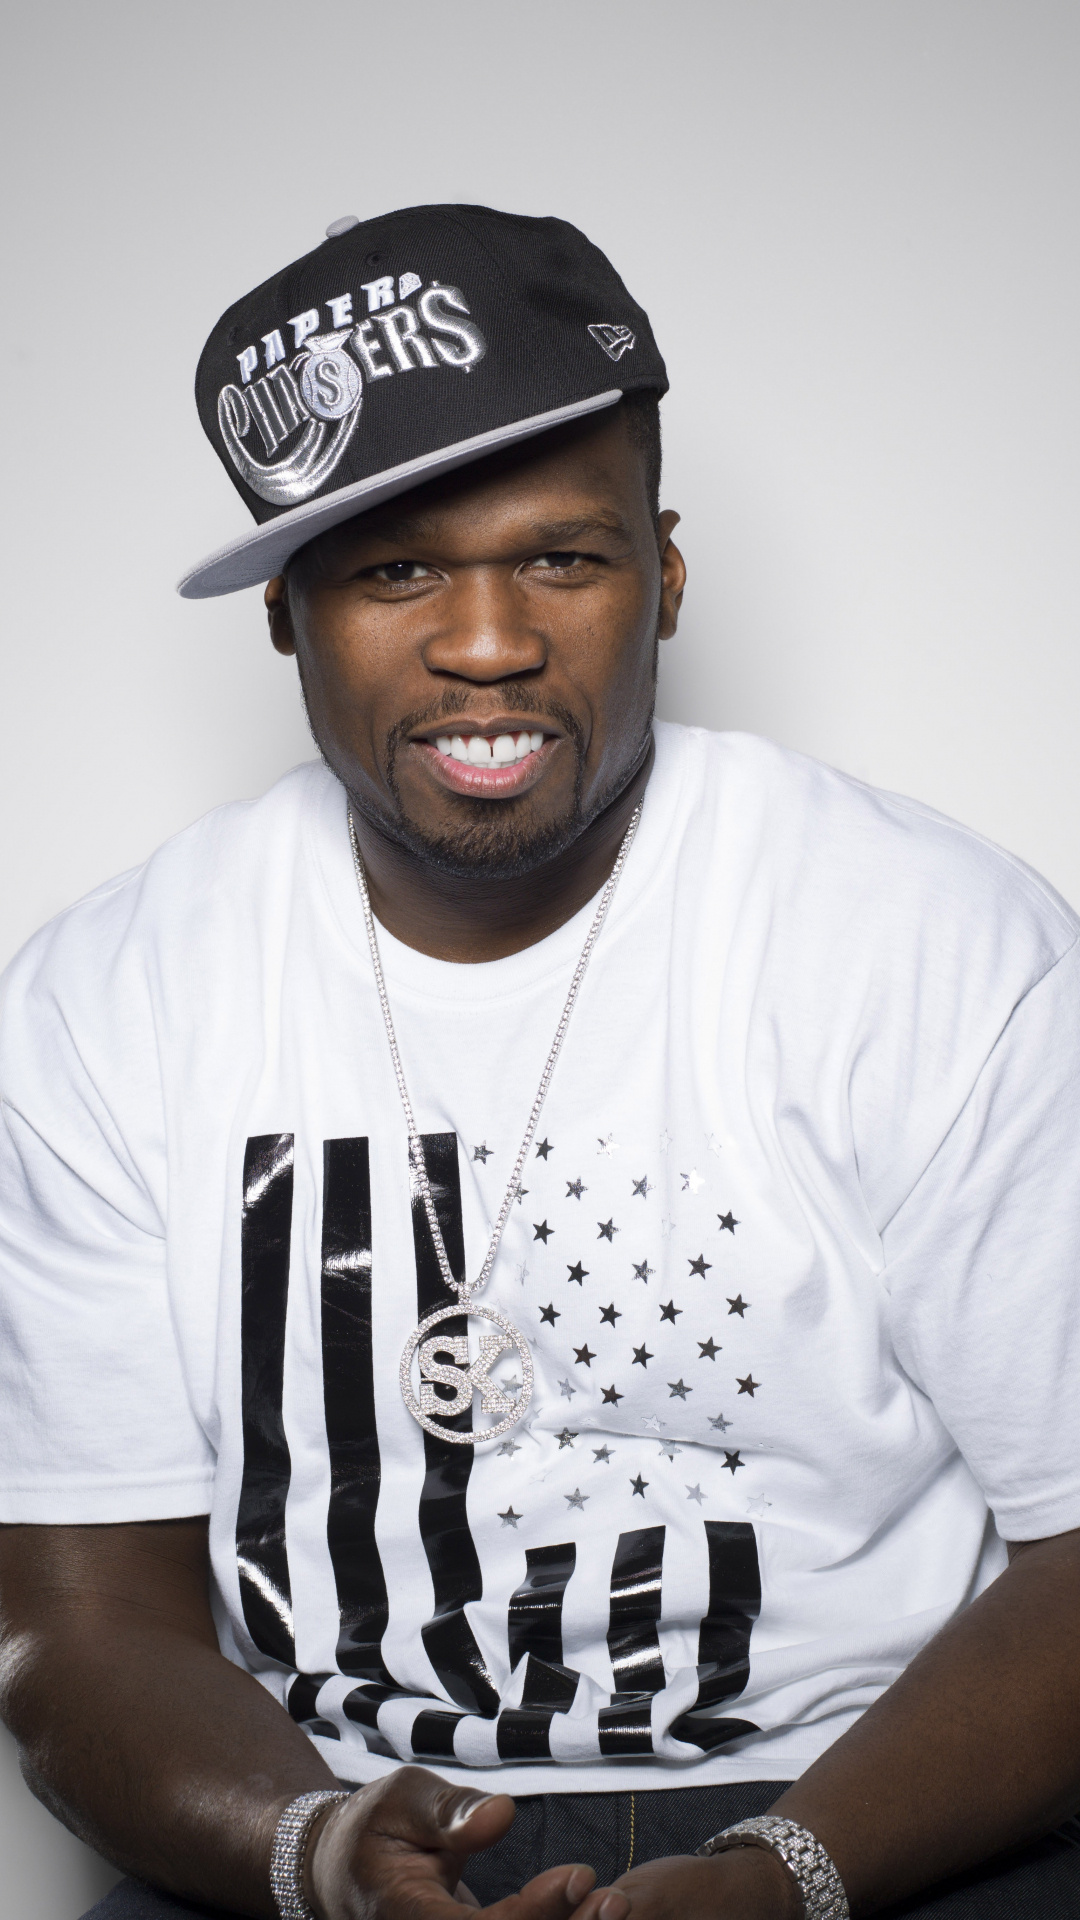 50 Cent: "How to Rob" was released as the commercial debut single by Columbia Records. 1080x1920 Full HD Wallpaper.